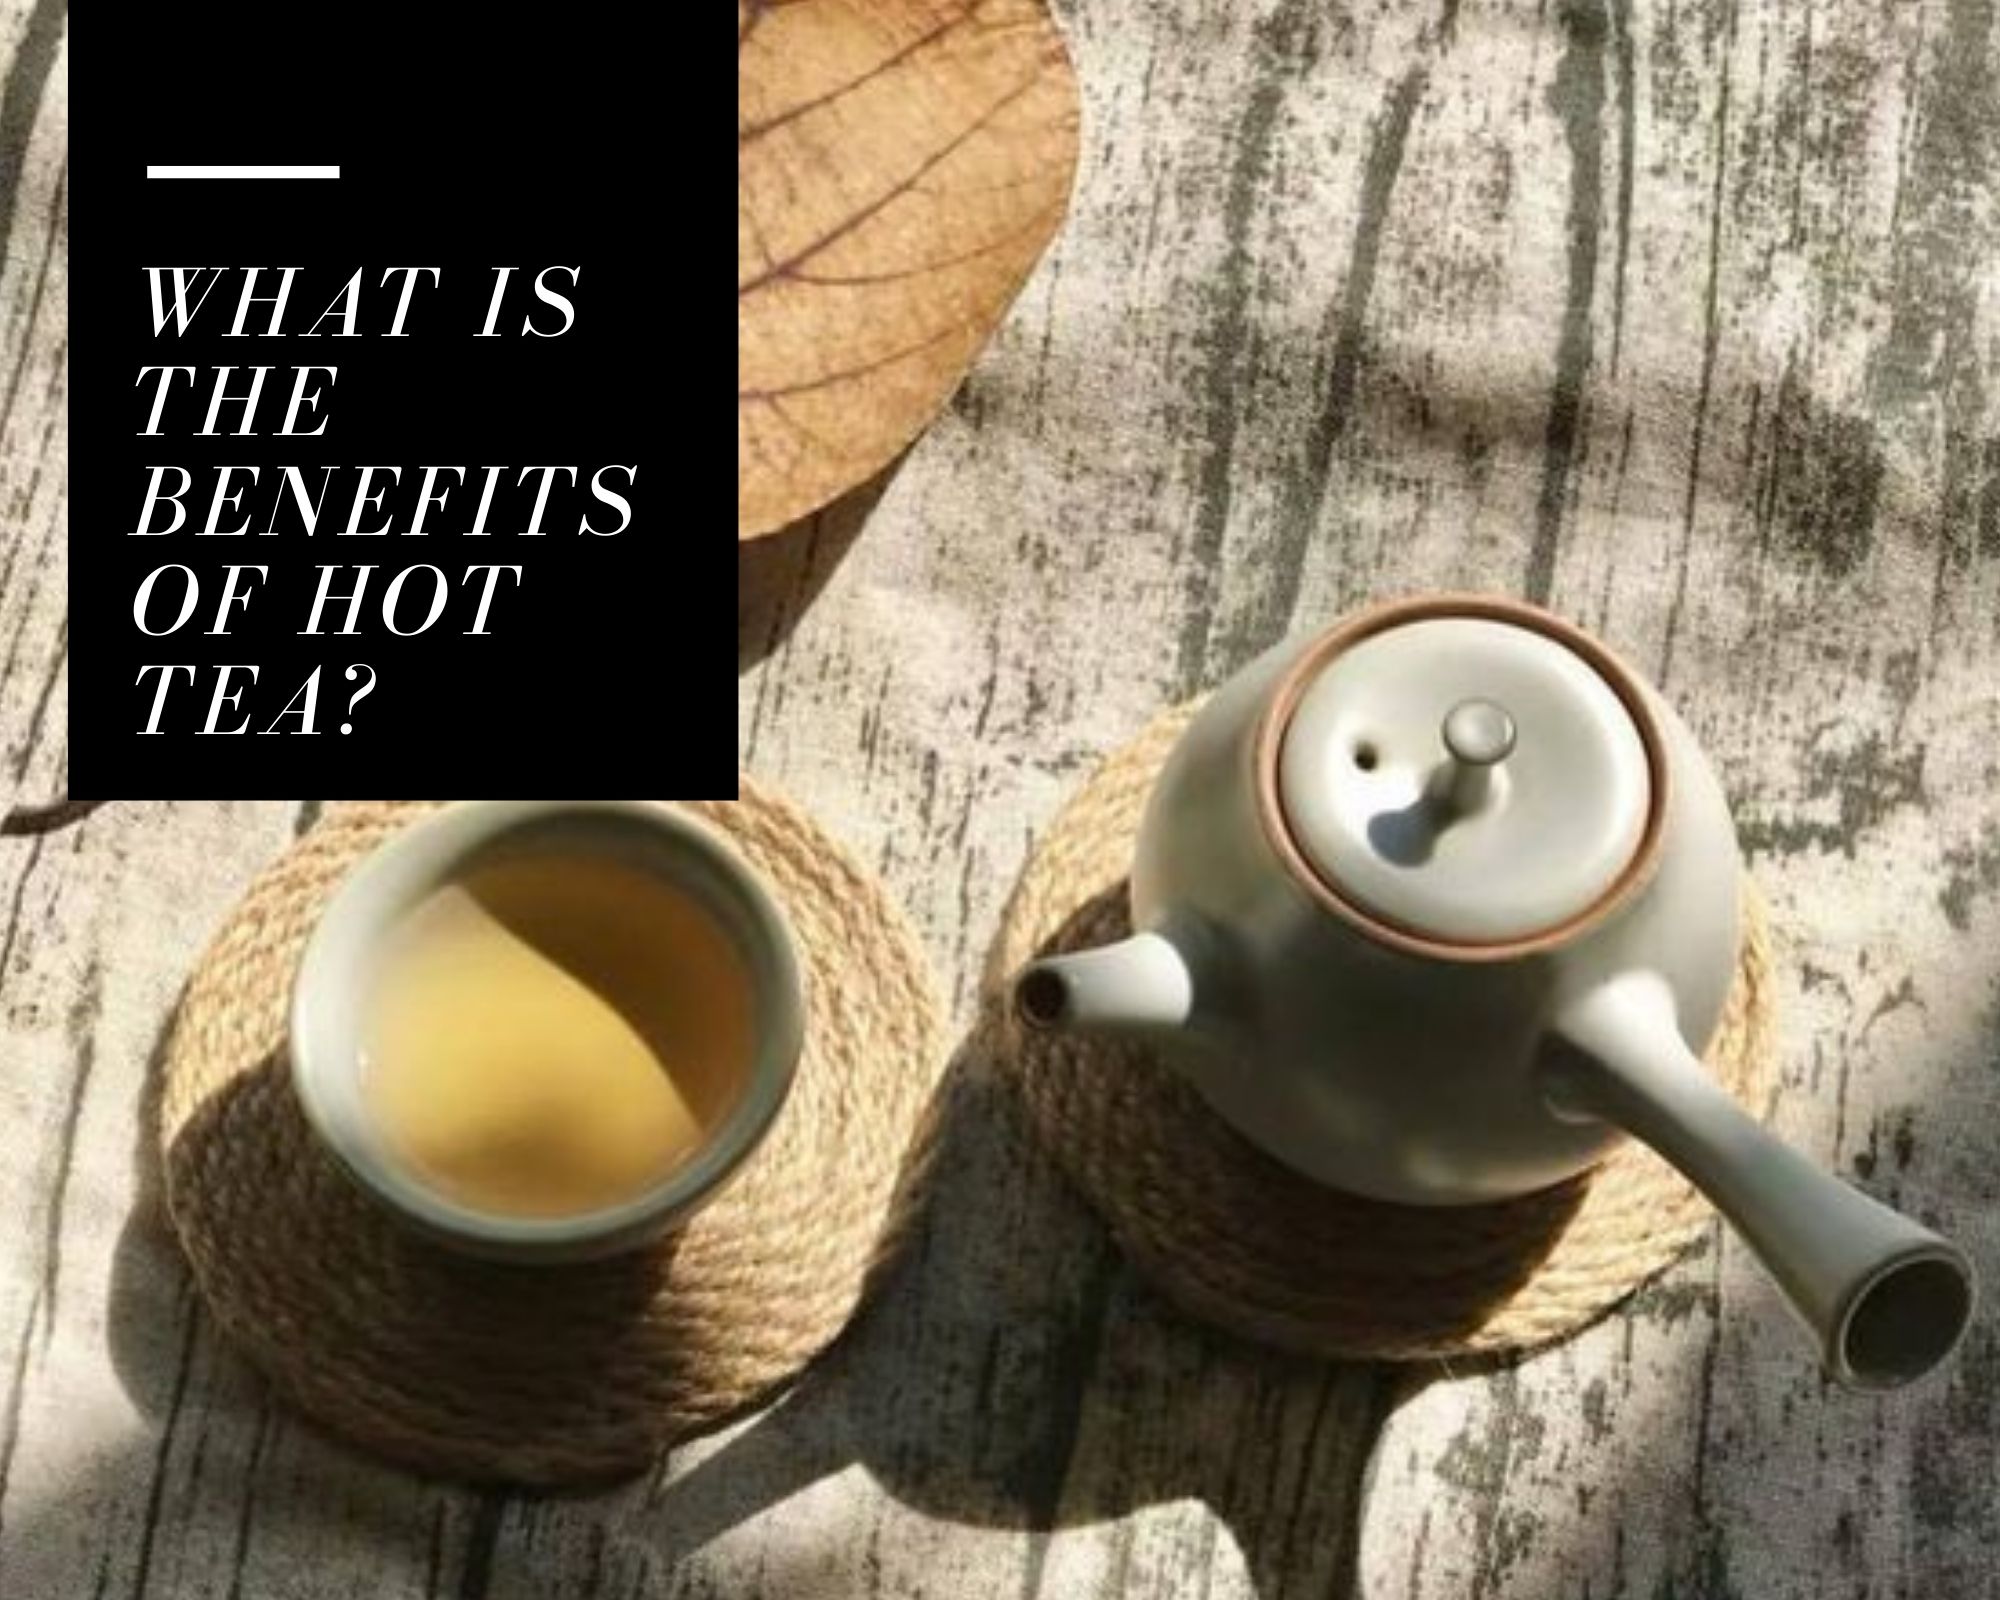 What is the benefits of Tea?